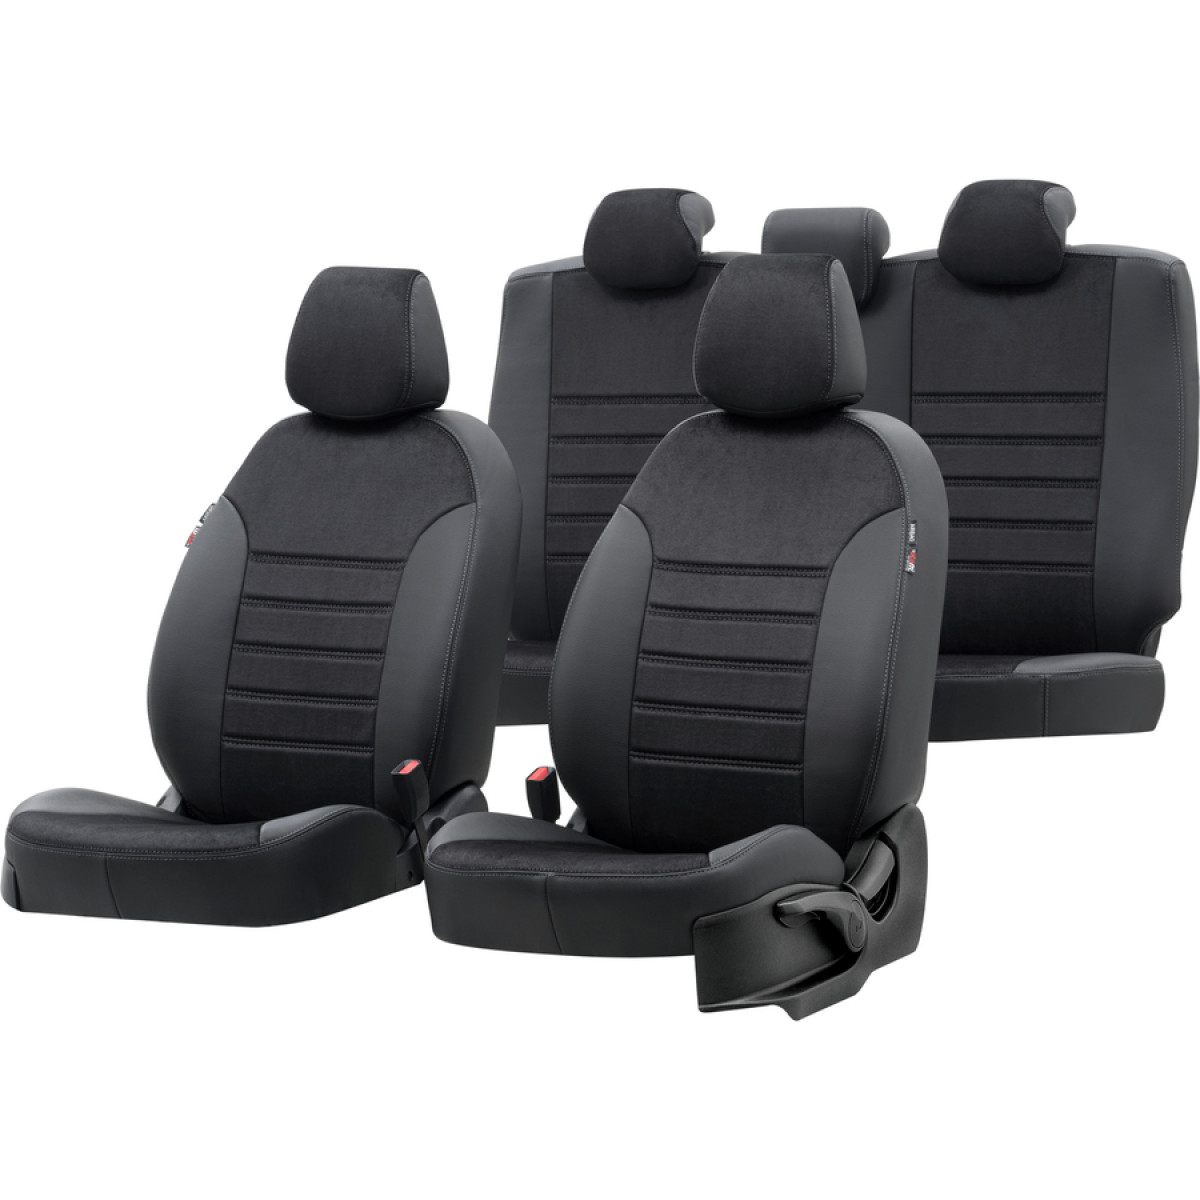 Milano seat covers (eco leather, textile) Nissan Qashqai II (5 places)